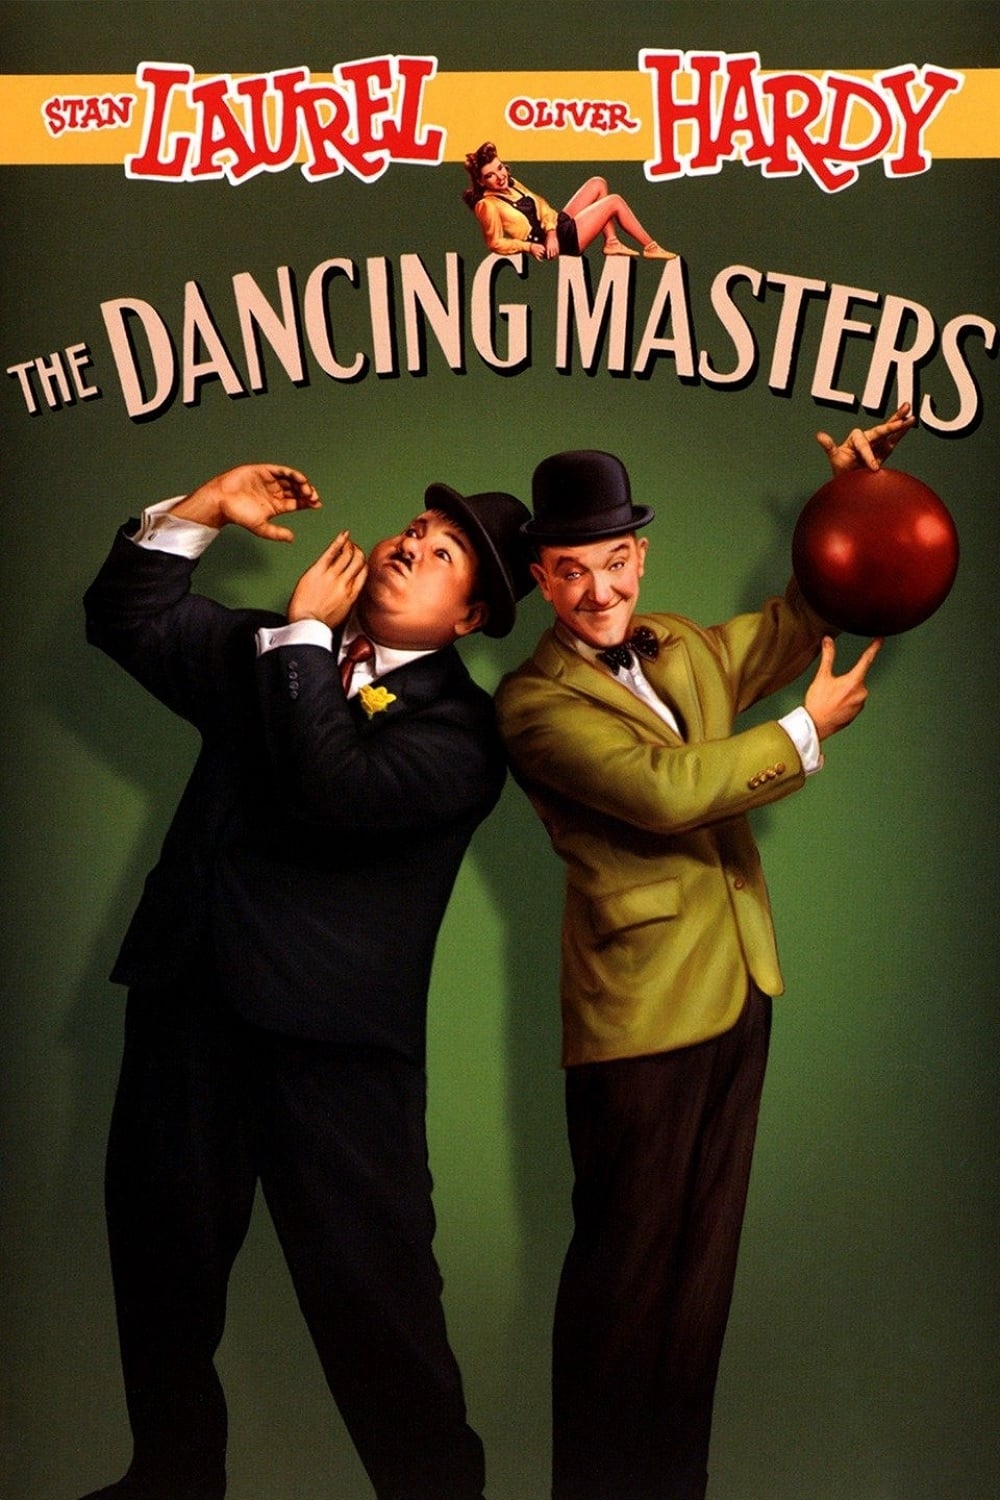 Poster for the movie "The Dancing Masters"